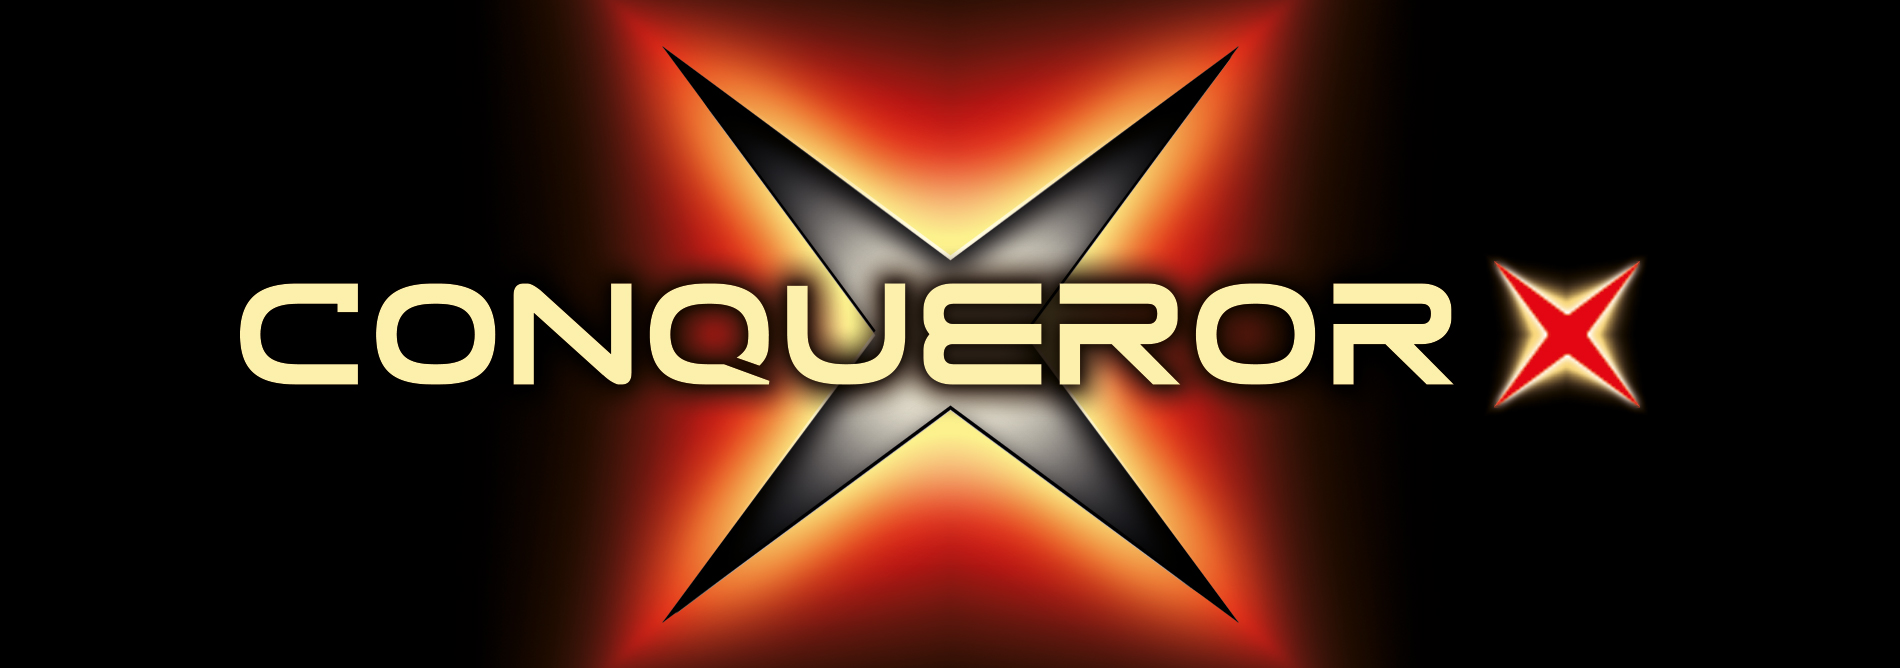 QubicaAMF Bowling Conqueror X Banner